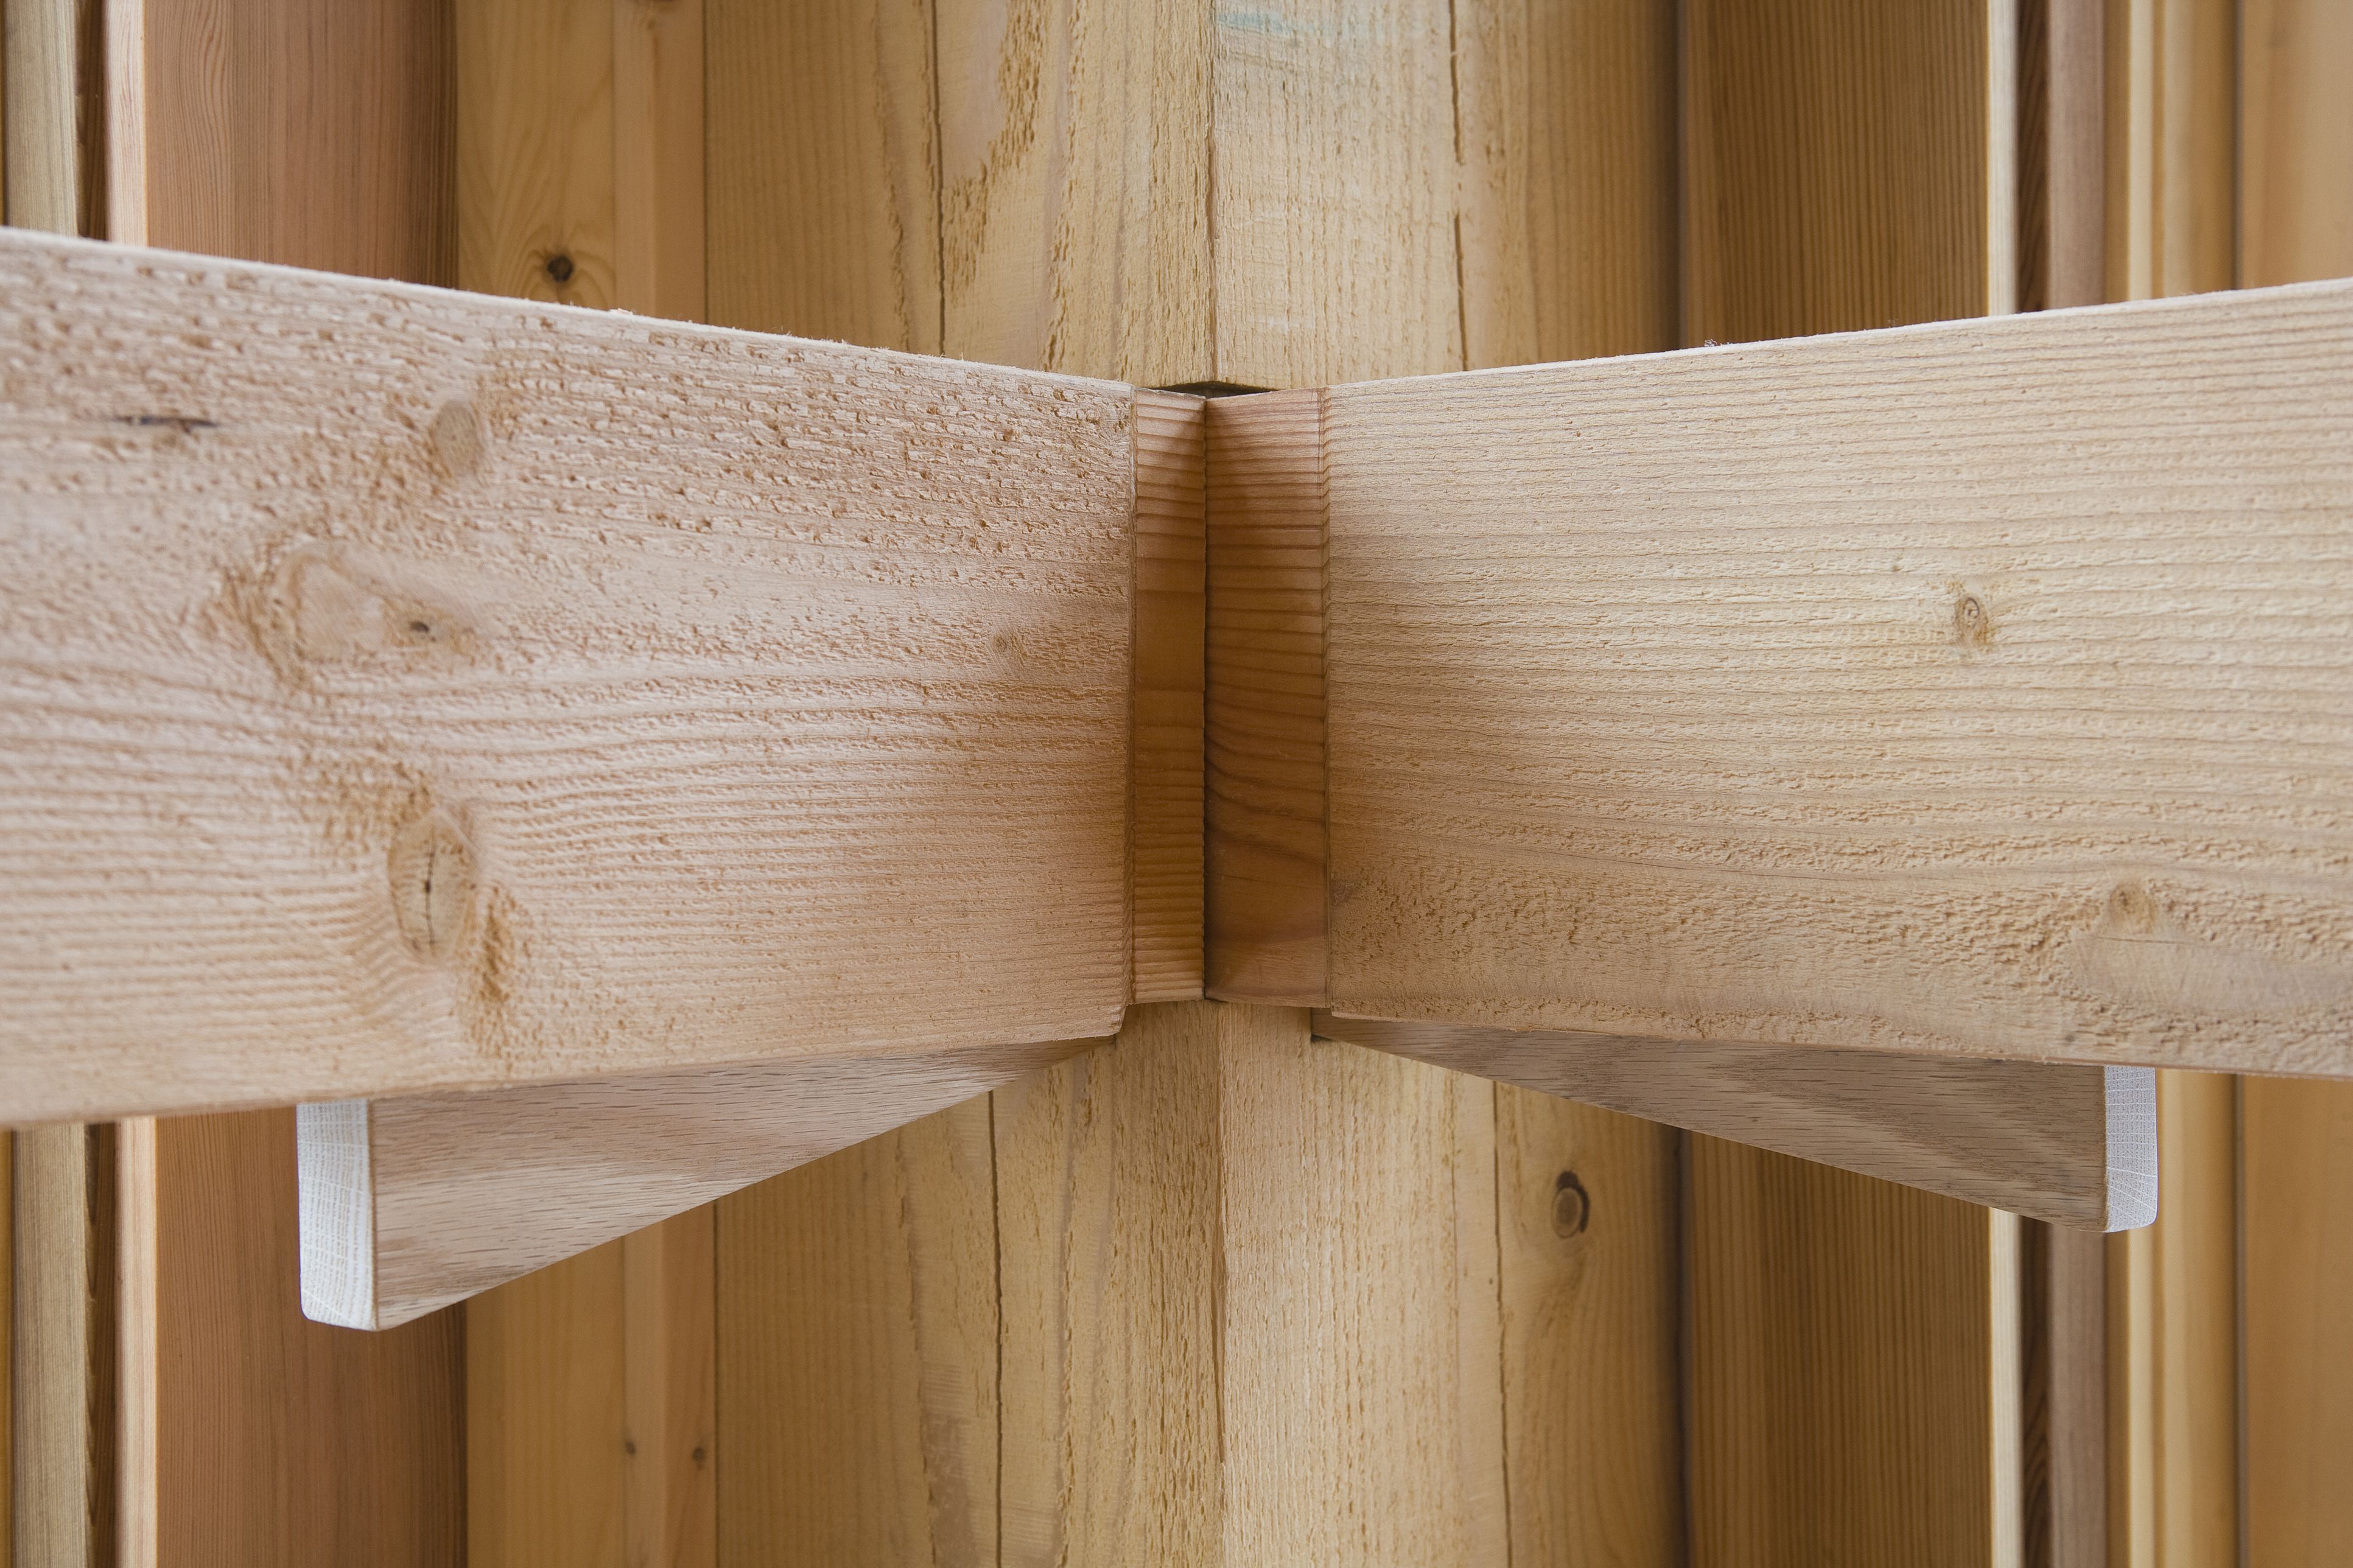 Creating a Mortise and Tenon Joint